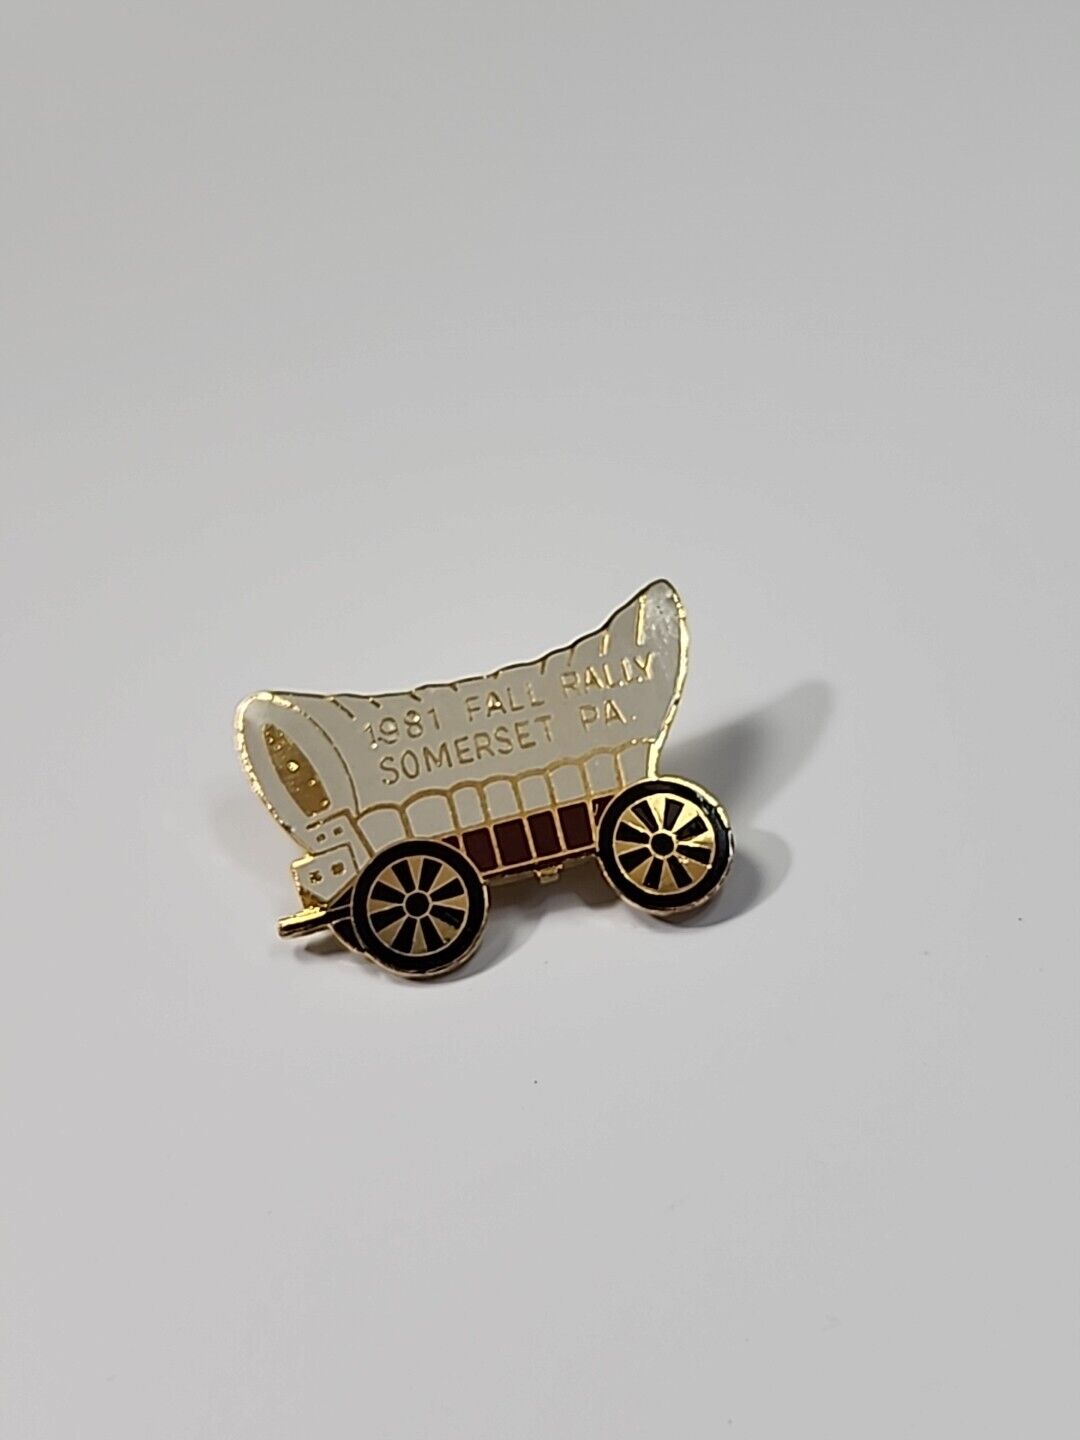 1981 Fall Rally Sommerset PA  Lapel Pin Covered Wagon 